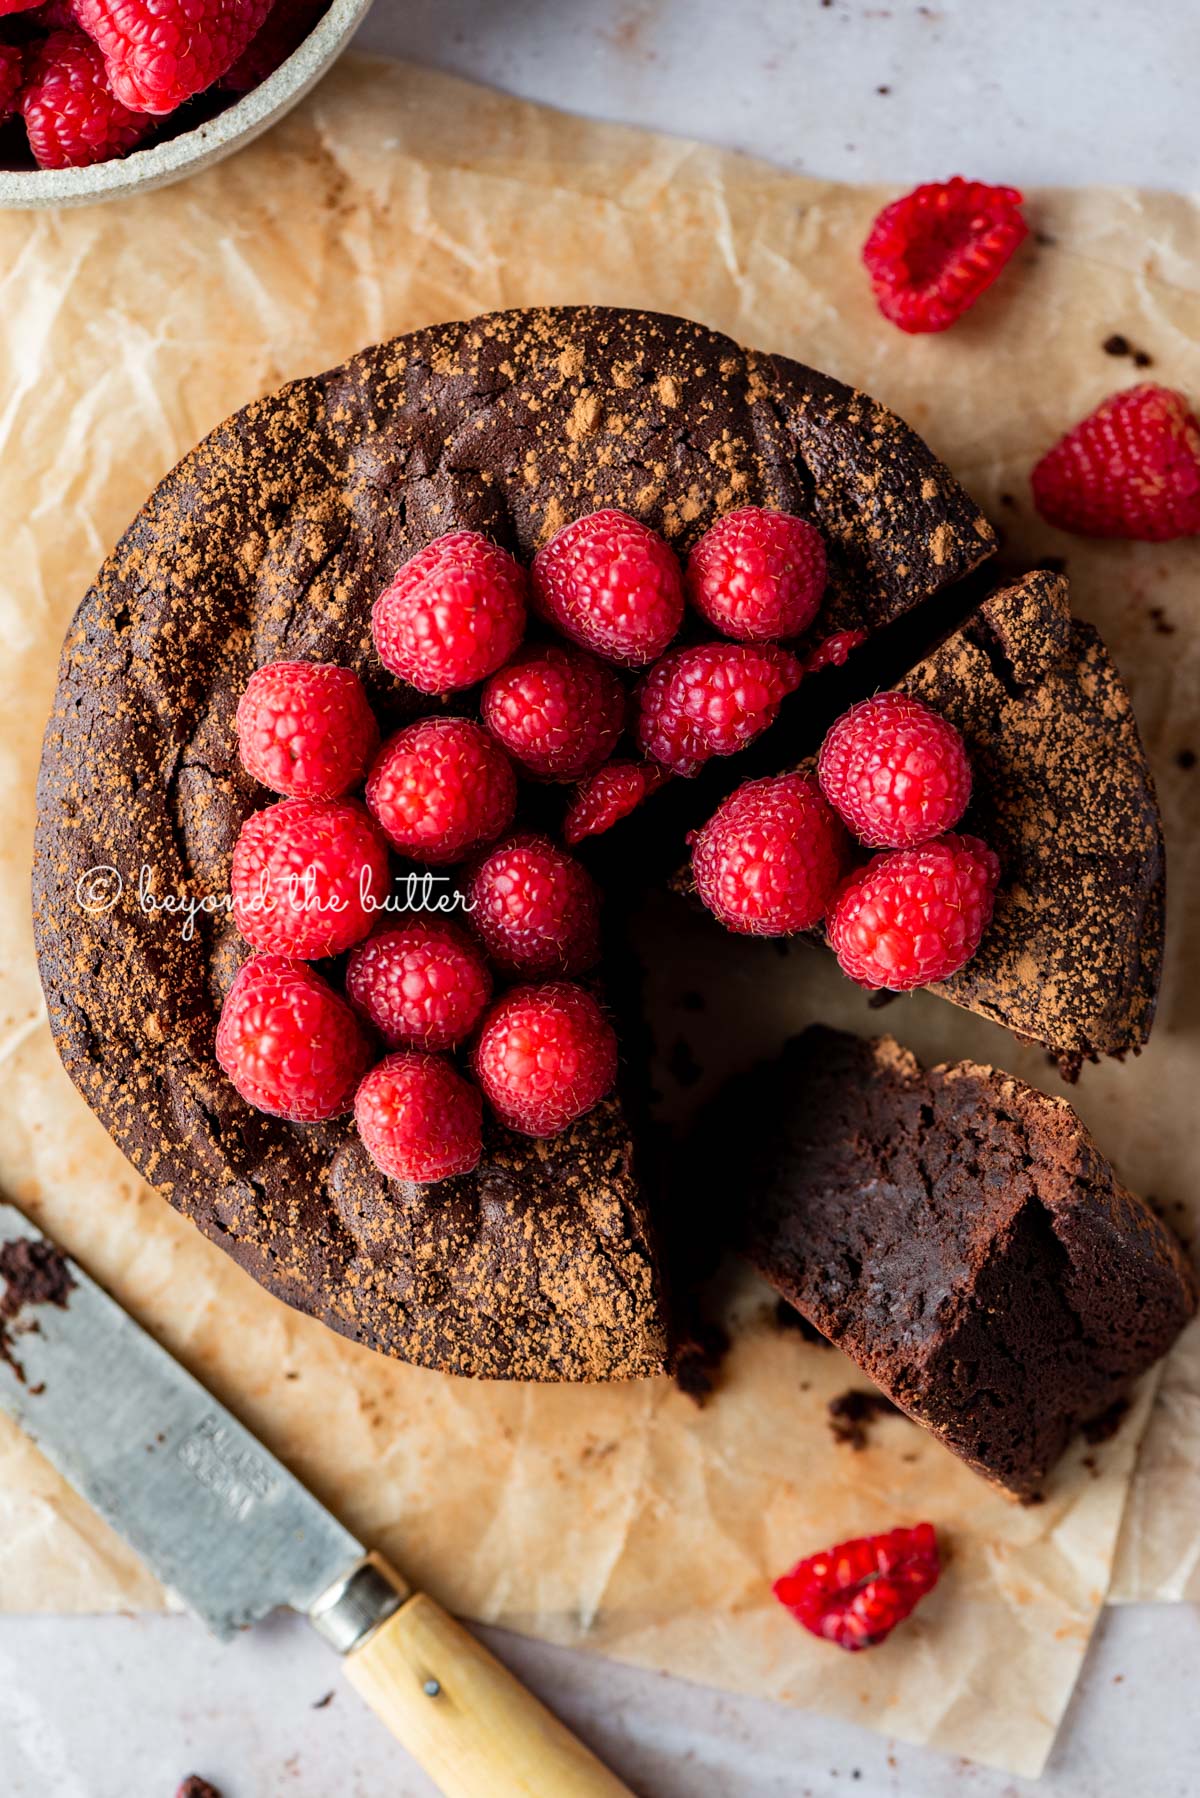 Sliced small flourless chocolate cake topped with cocoa powder and fresh raspberries on parchment paper.